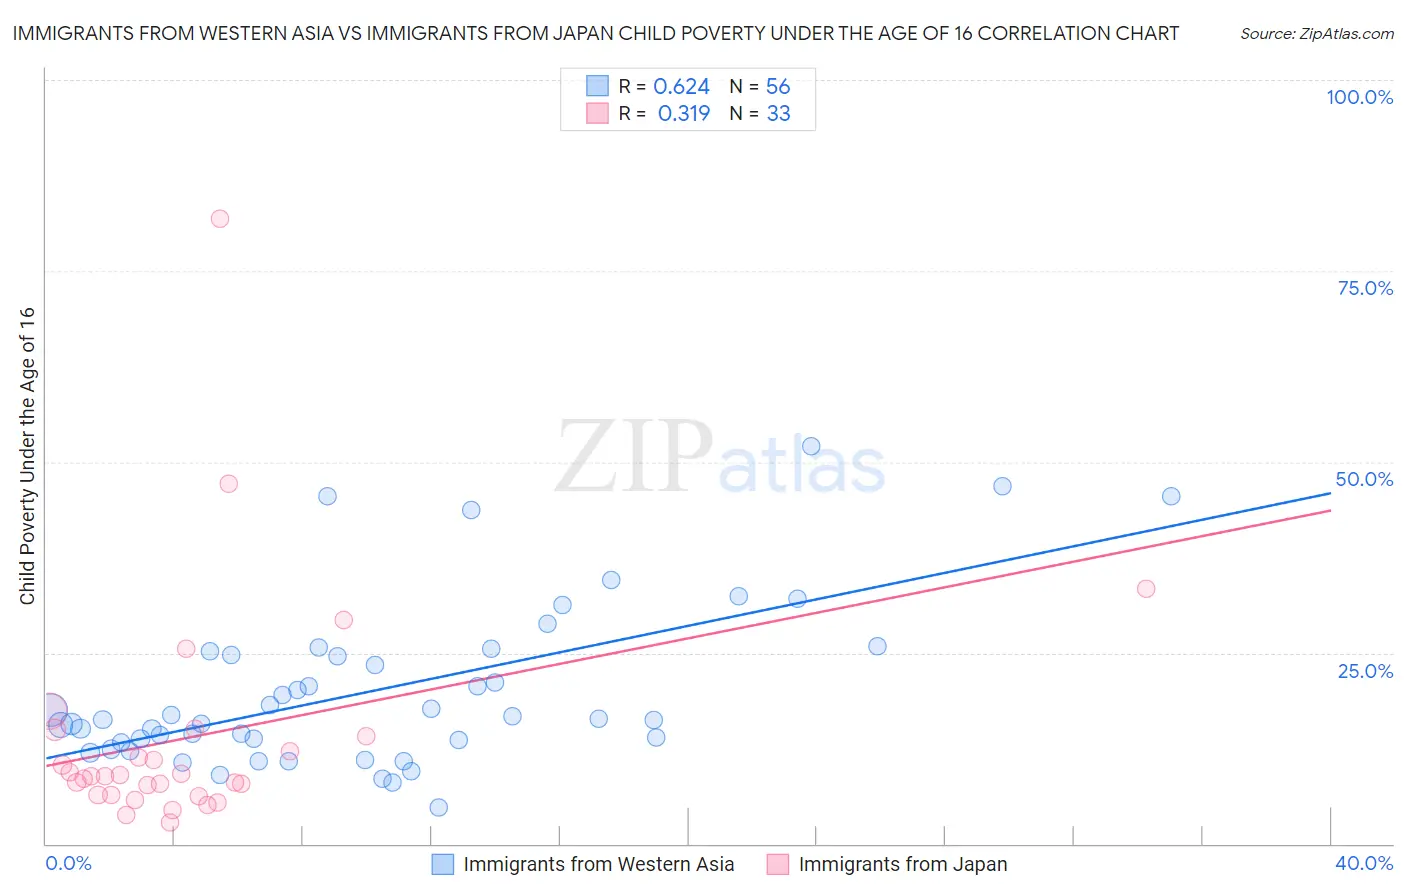 Immigrants from Western Asia vs Immigrants from Japan Child Poverty Under the Age of 16